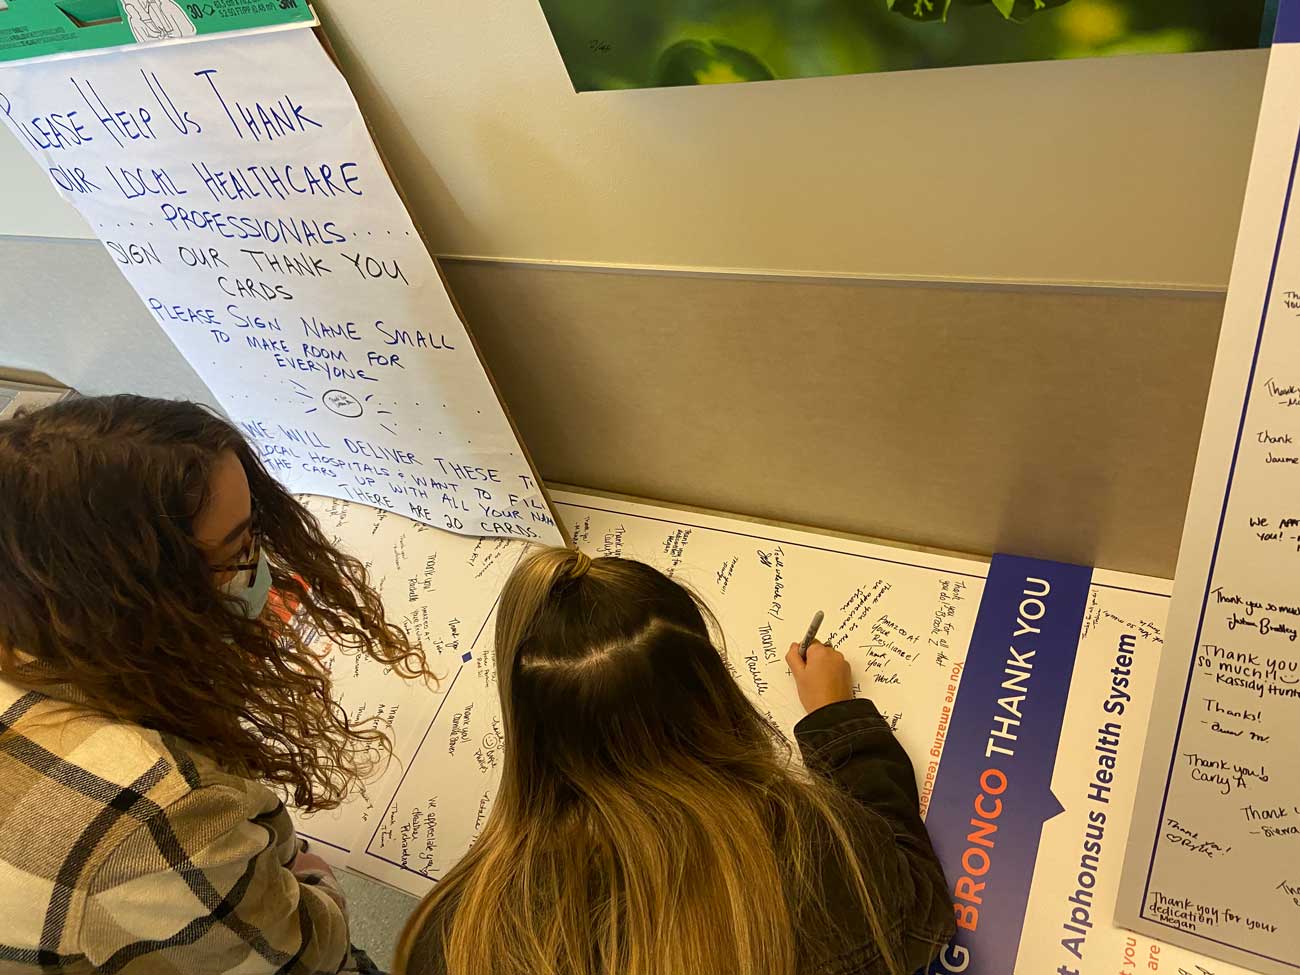 Students sign giant thank you card for health care professionals